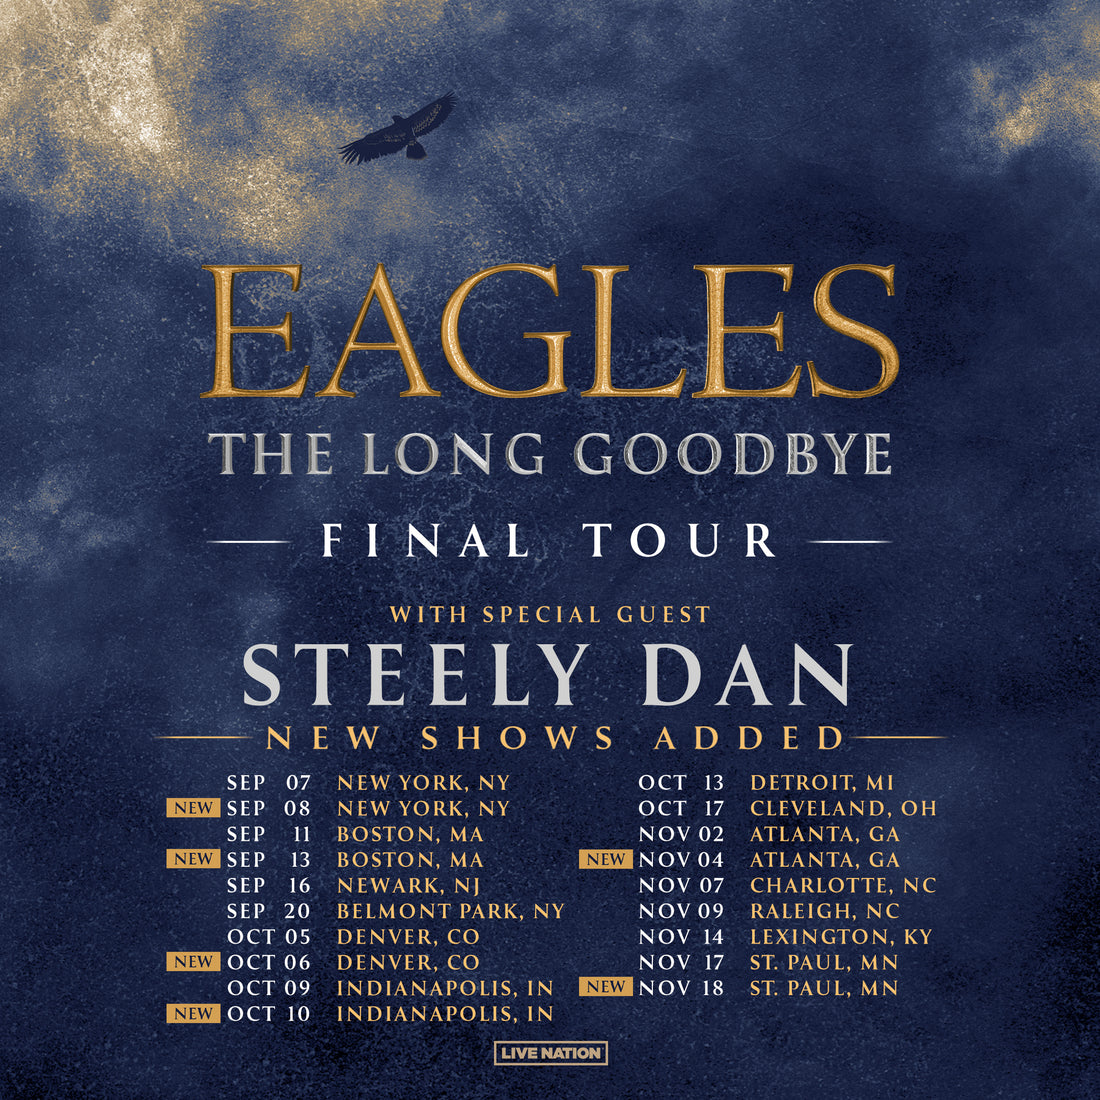 New Dates Added to "The Long Goodbye" Tour